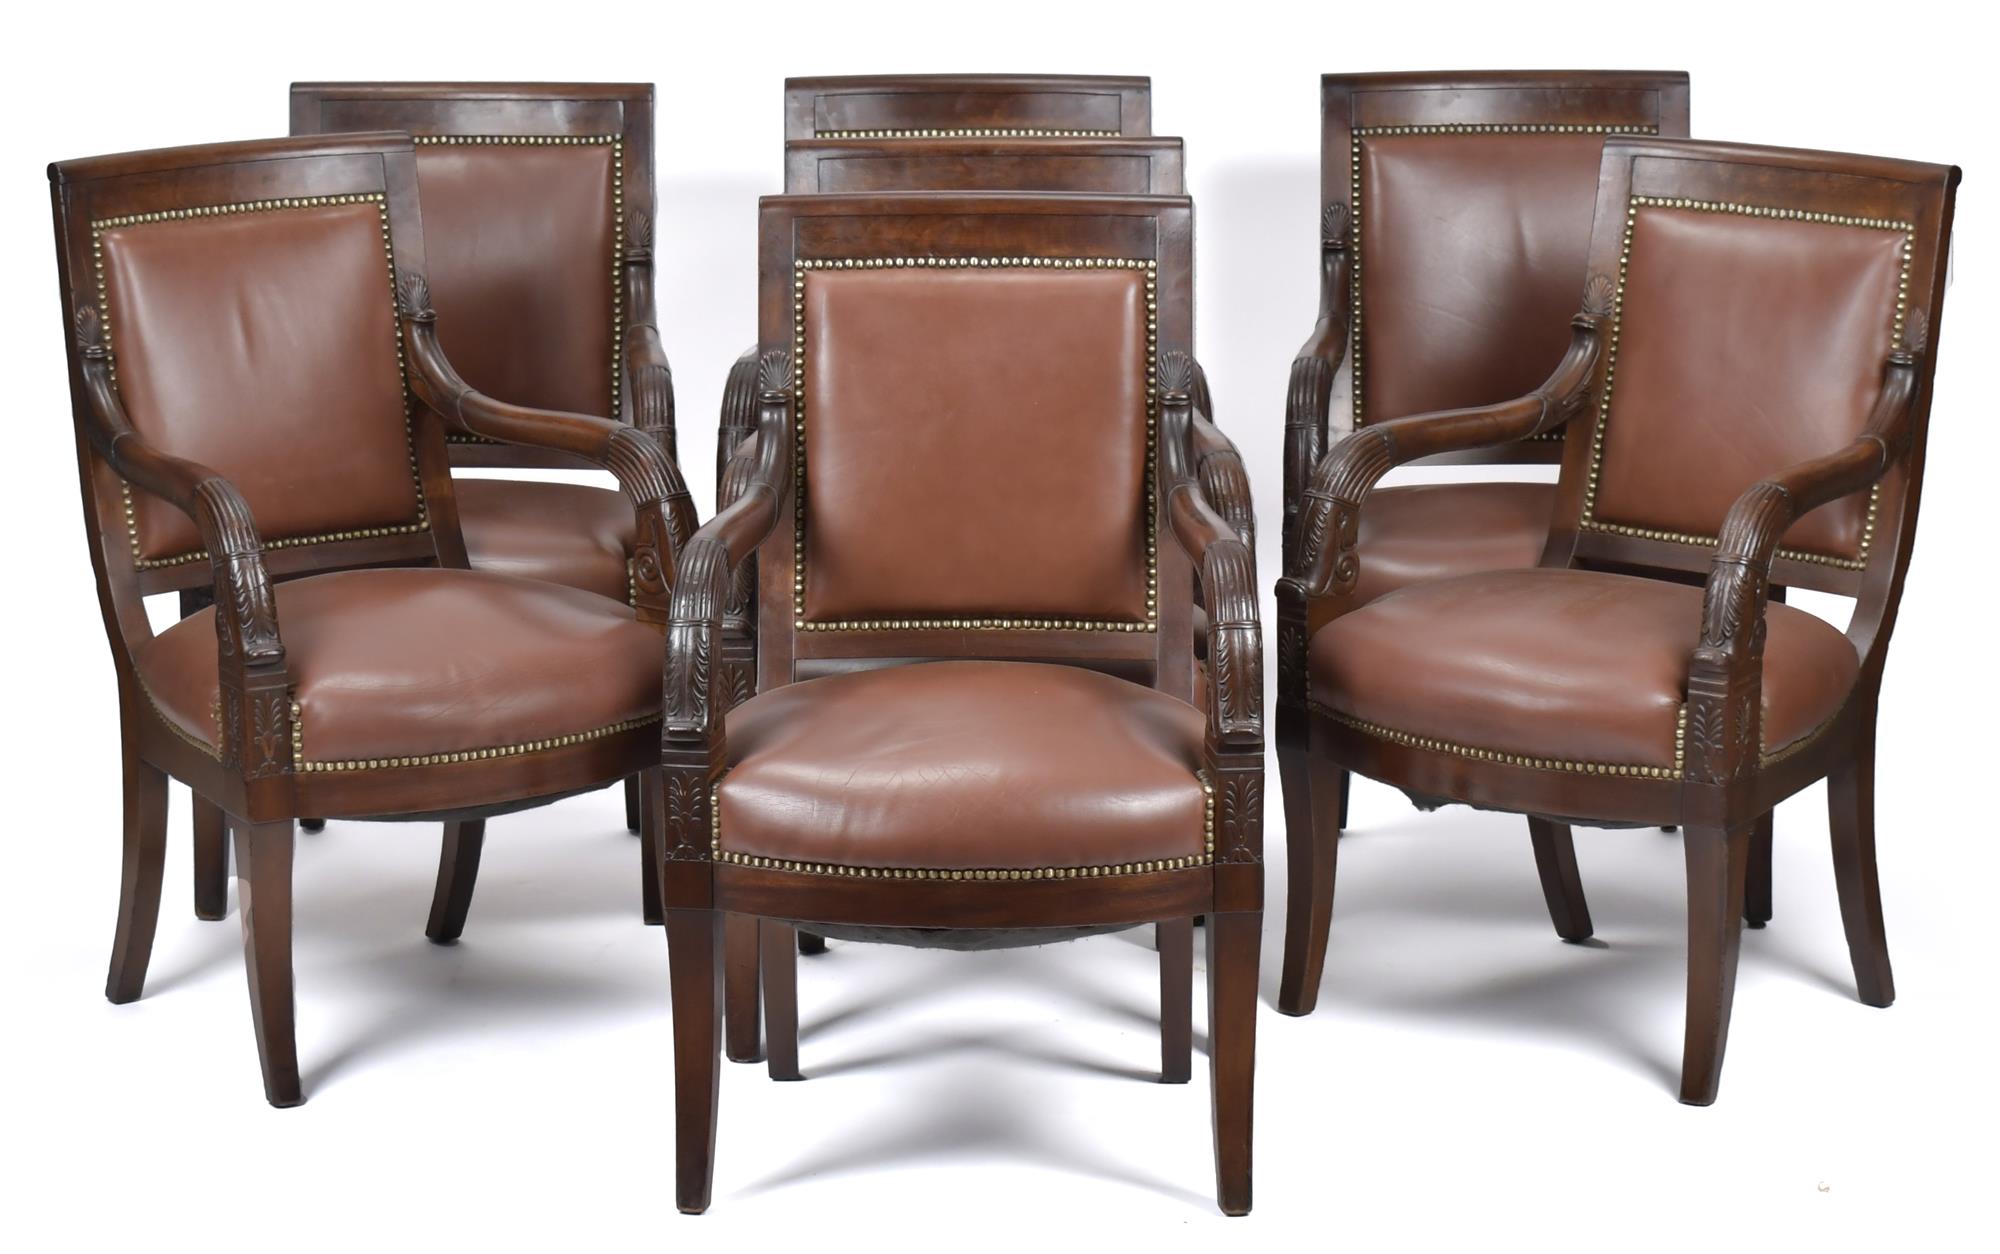 SET OF SEVEN FRENCH EMPIRE ARMCHAIRS  3ac8b8